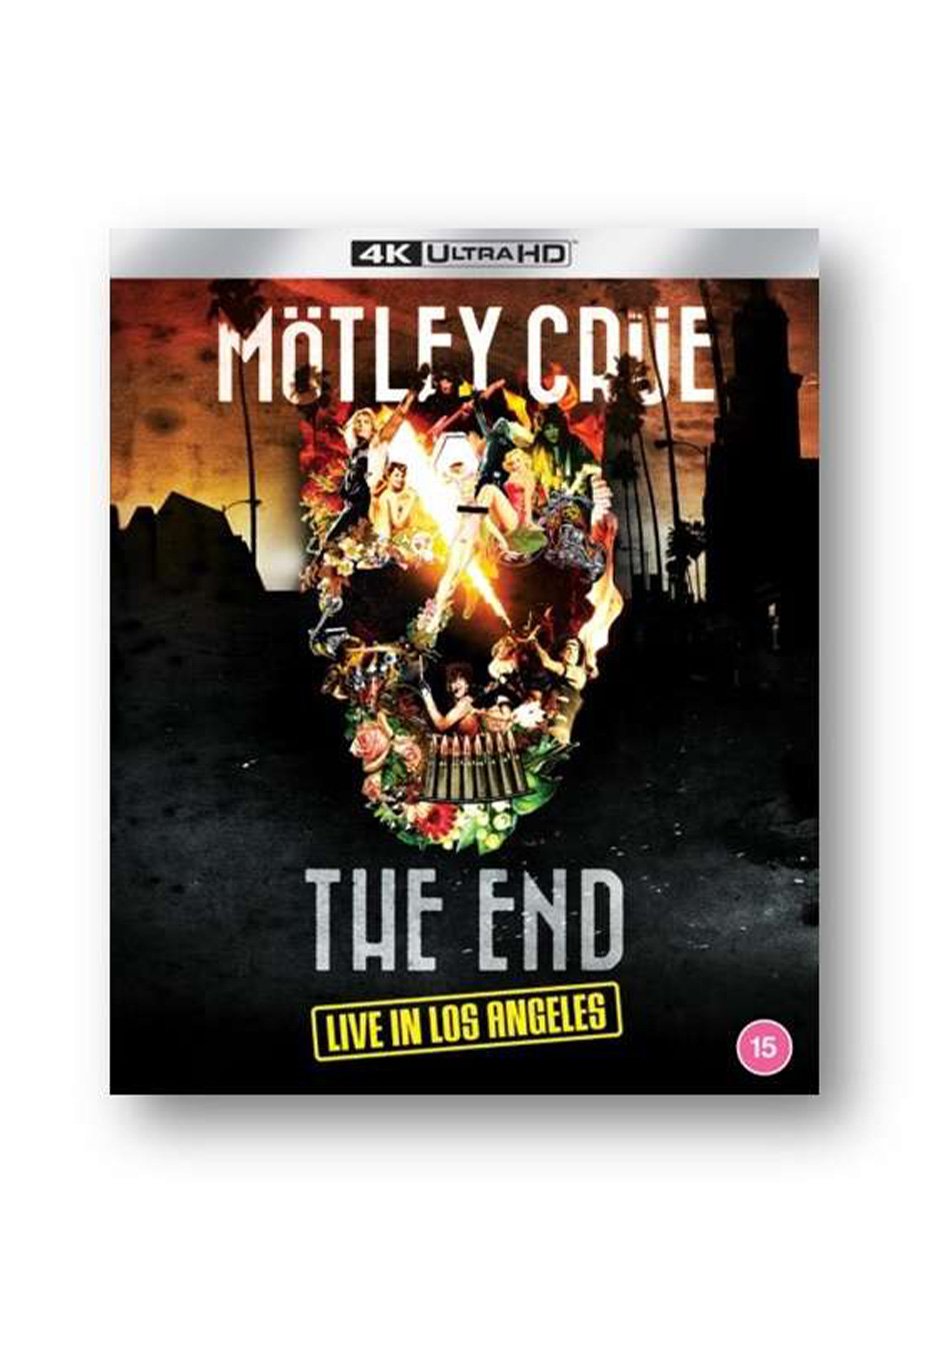 Mötley Crüe - The End: Live in Los Angeles (Live At The Staples Center, LA / 2015) - Blu-Ray